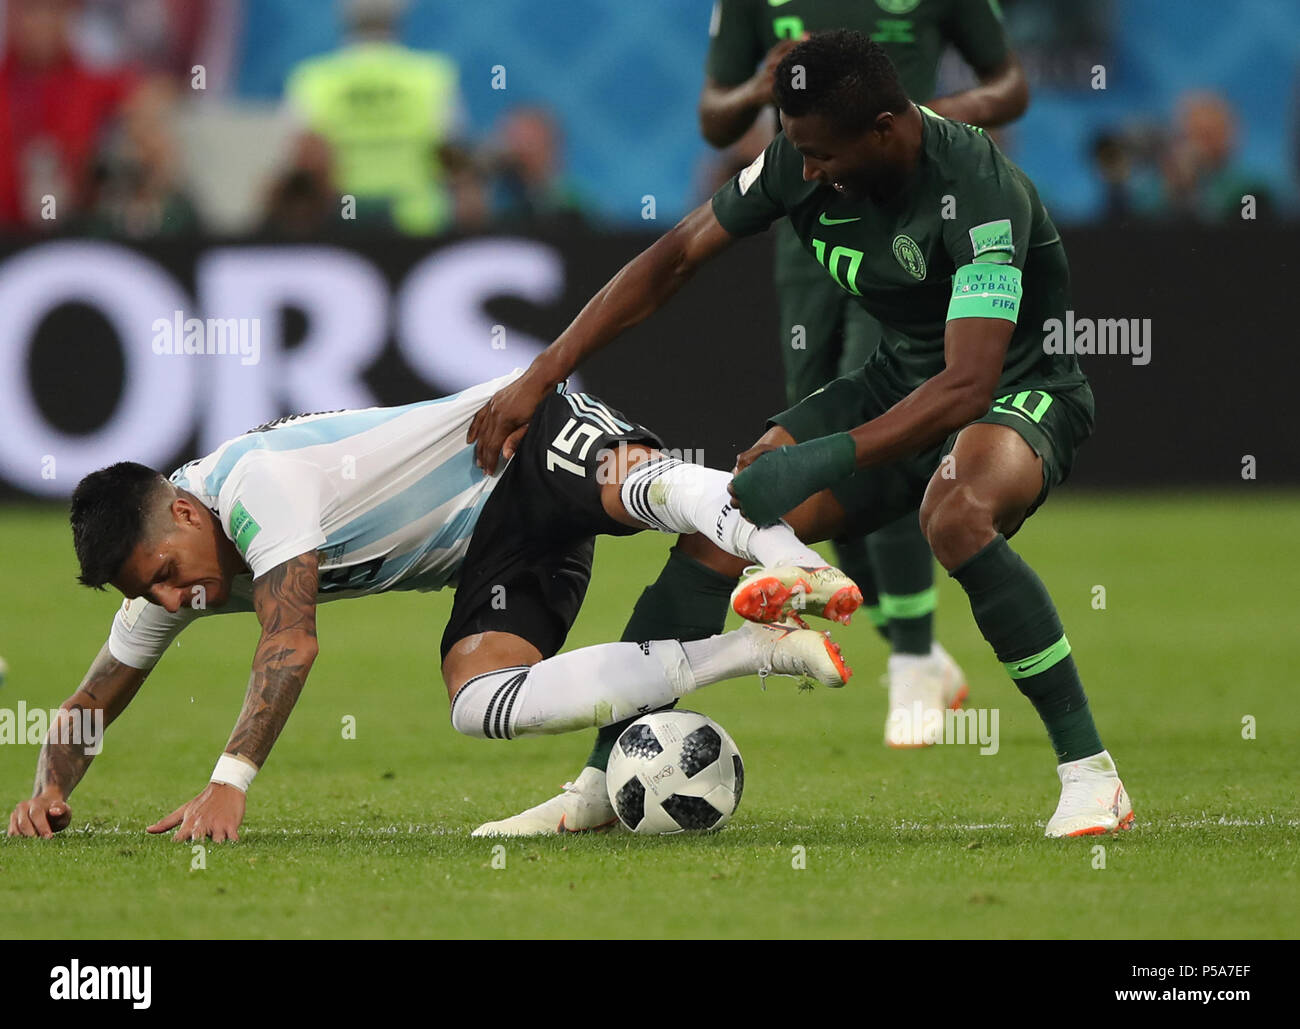 Saint Petersburg, Russia. 26th June, 2018. John Obi Mikel (R) of Nigeria vies with Enzo Perez of Argentina during the 2018 FIFA World Cup Group D match between Nigeria and Argentina in Saint Petersburg, Russia, June 26, 2018. Credit: Wu Zhuang/Xinhua/Alamy Live News Stock Photo